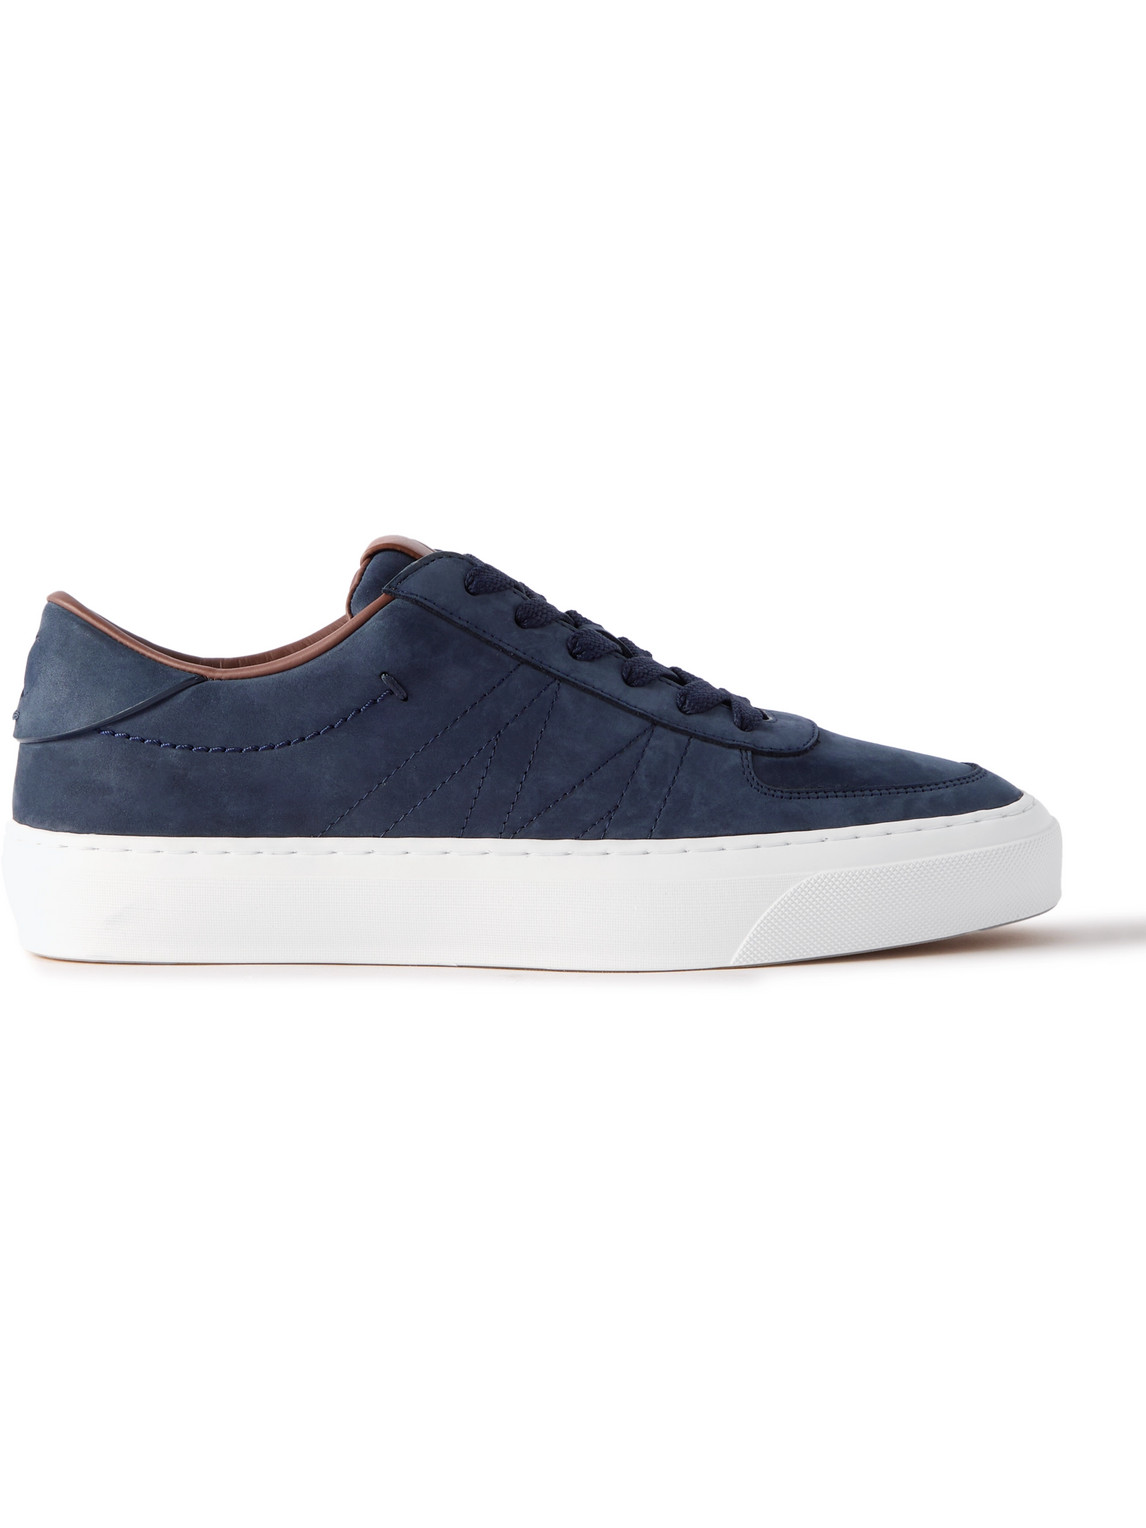 Monclub Embroidered Suede Sneakers